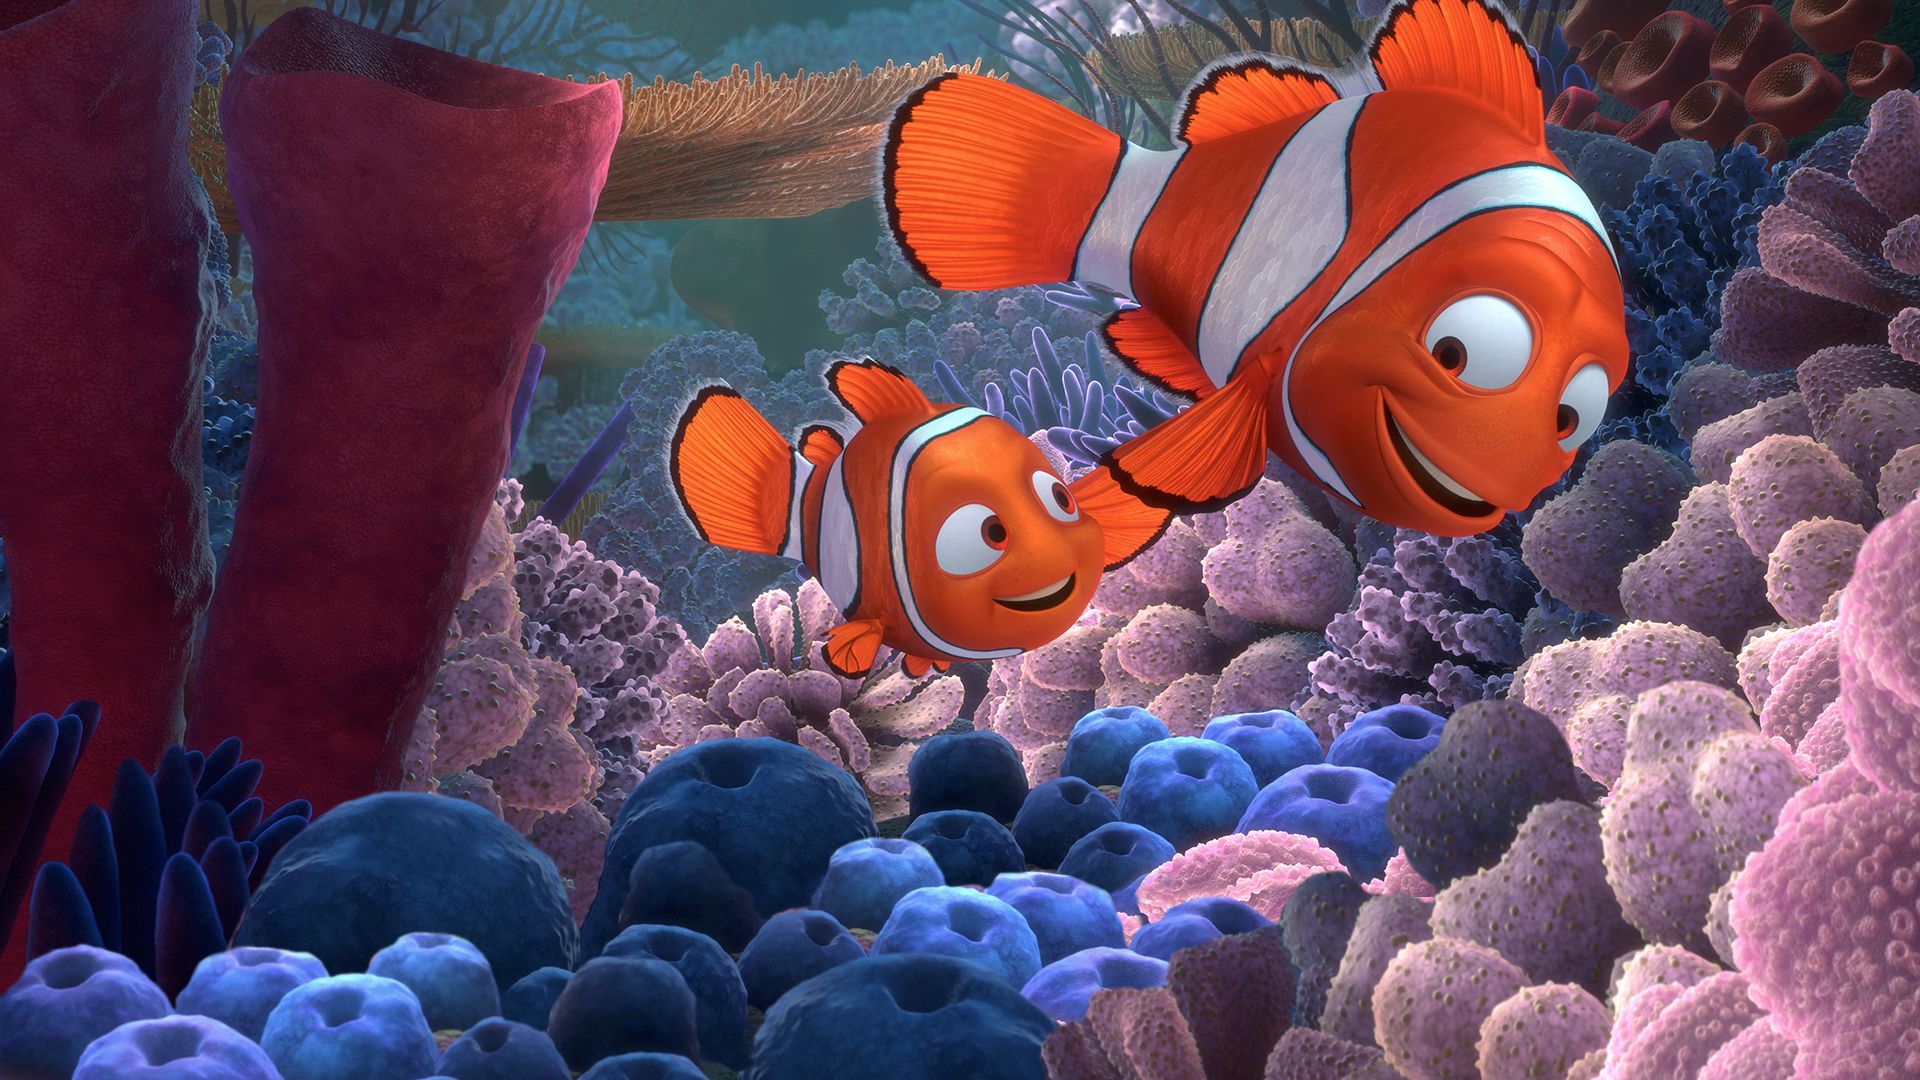 Finding Nemo Movie In Tamil Free BETTER Download Direct Link